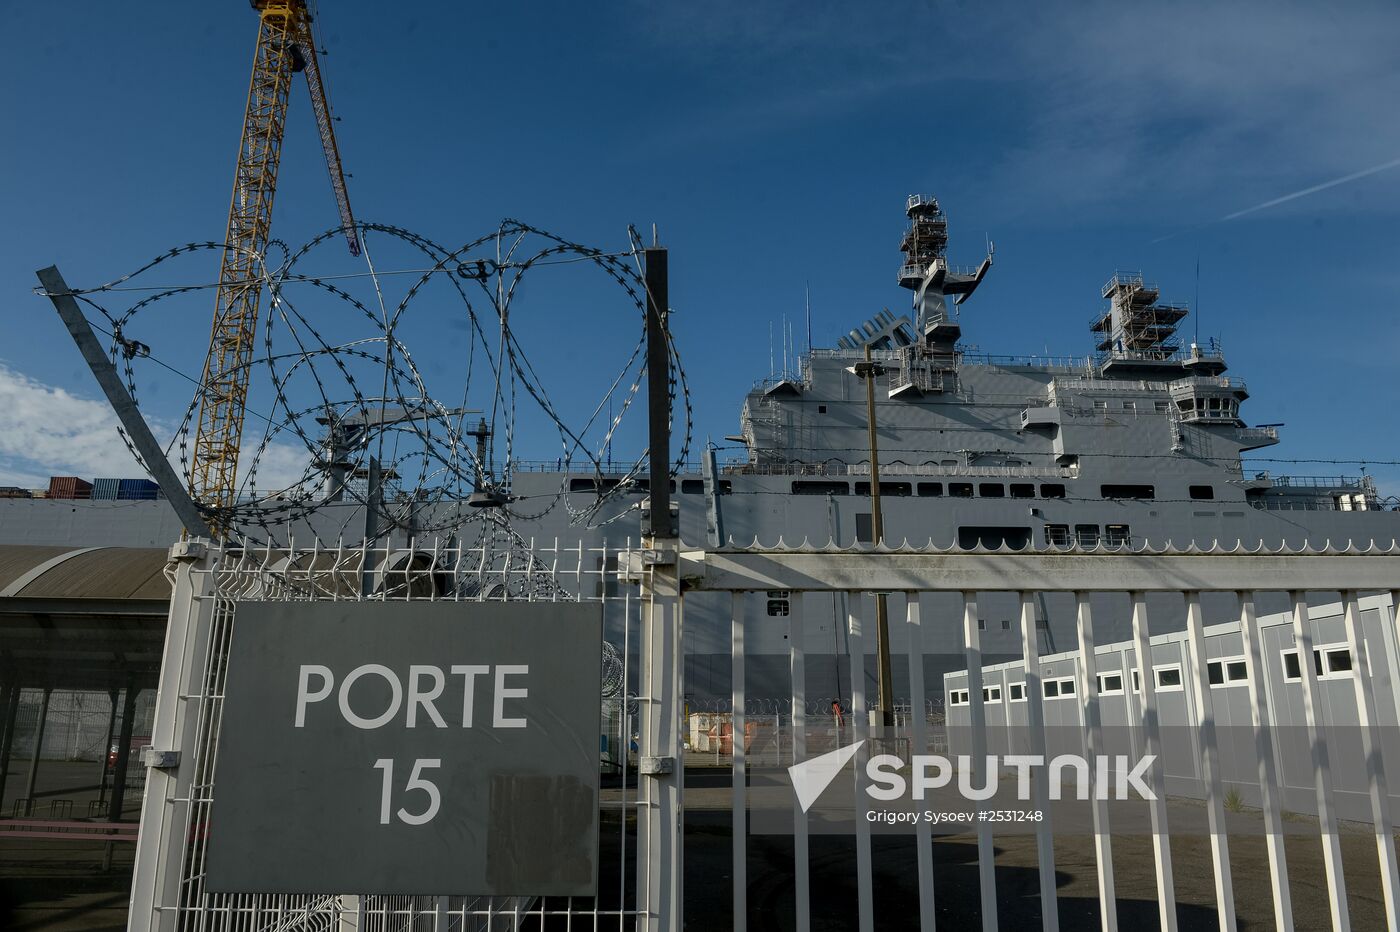 Second Mistral helicopter carrier floated out in France